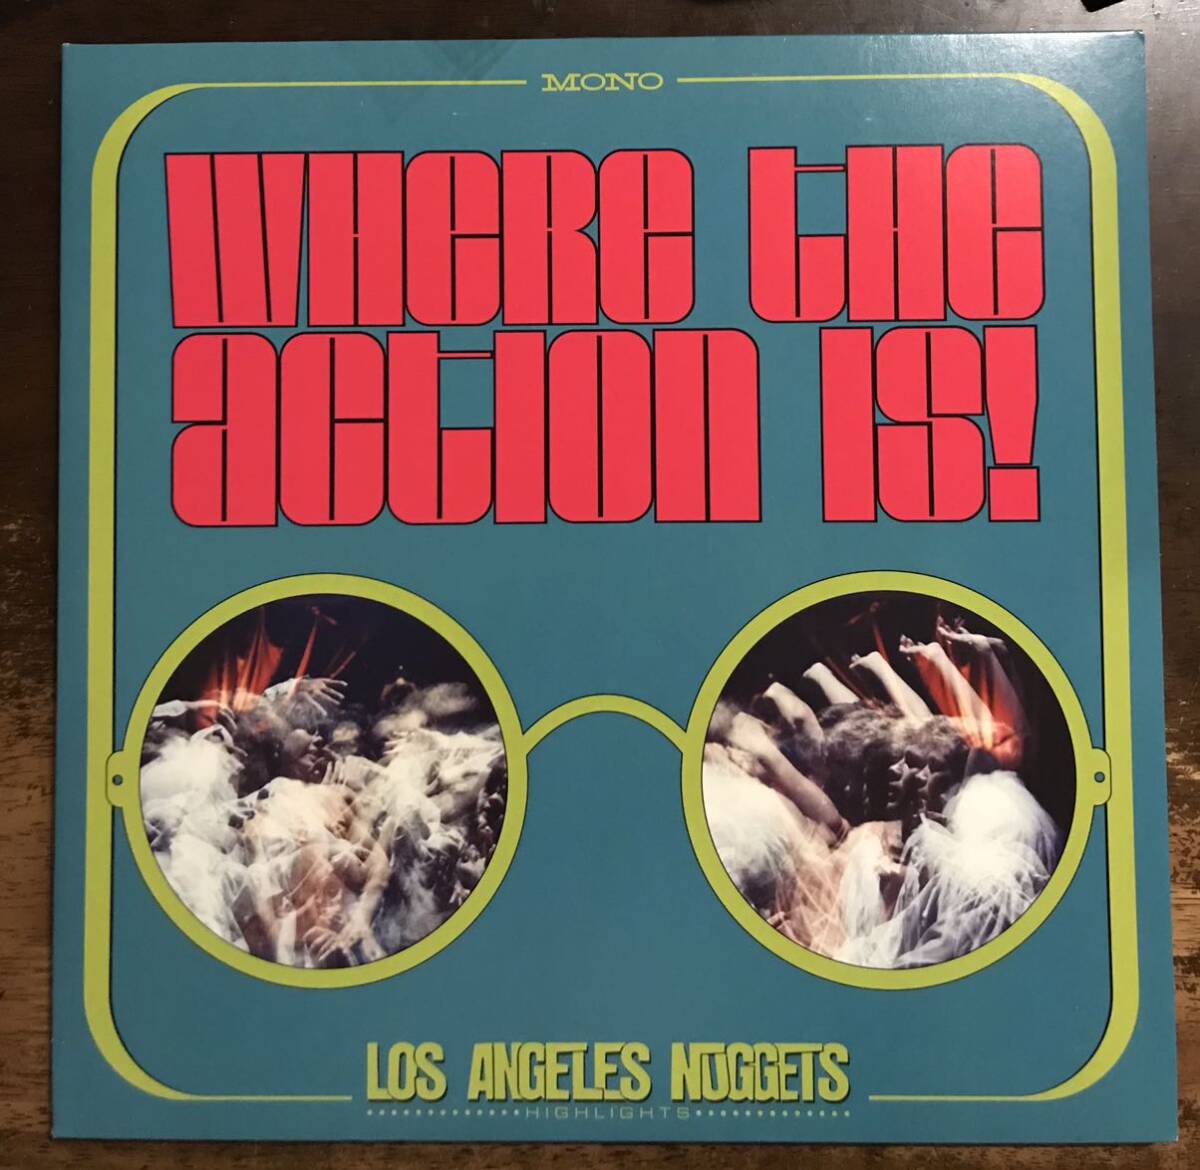 ■Los Angeles Nuggets High Lights / Where The Action Is! ■V.A.■ 2LP / 2019 Rhino / West Coast Psychedelic Rock / Acid Psyche / A_画像1